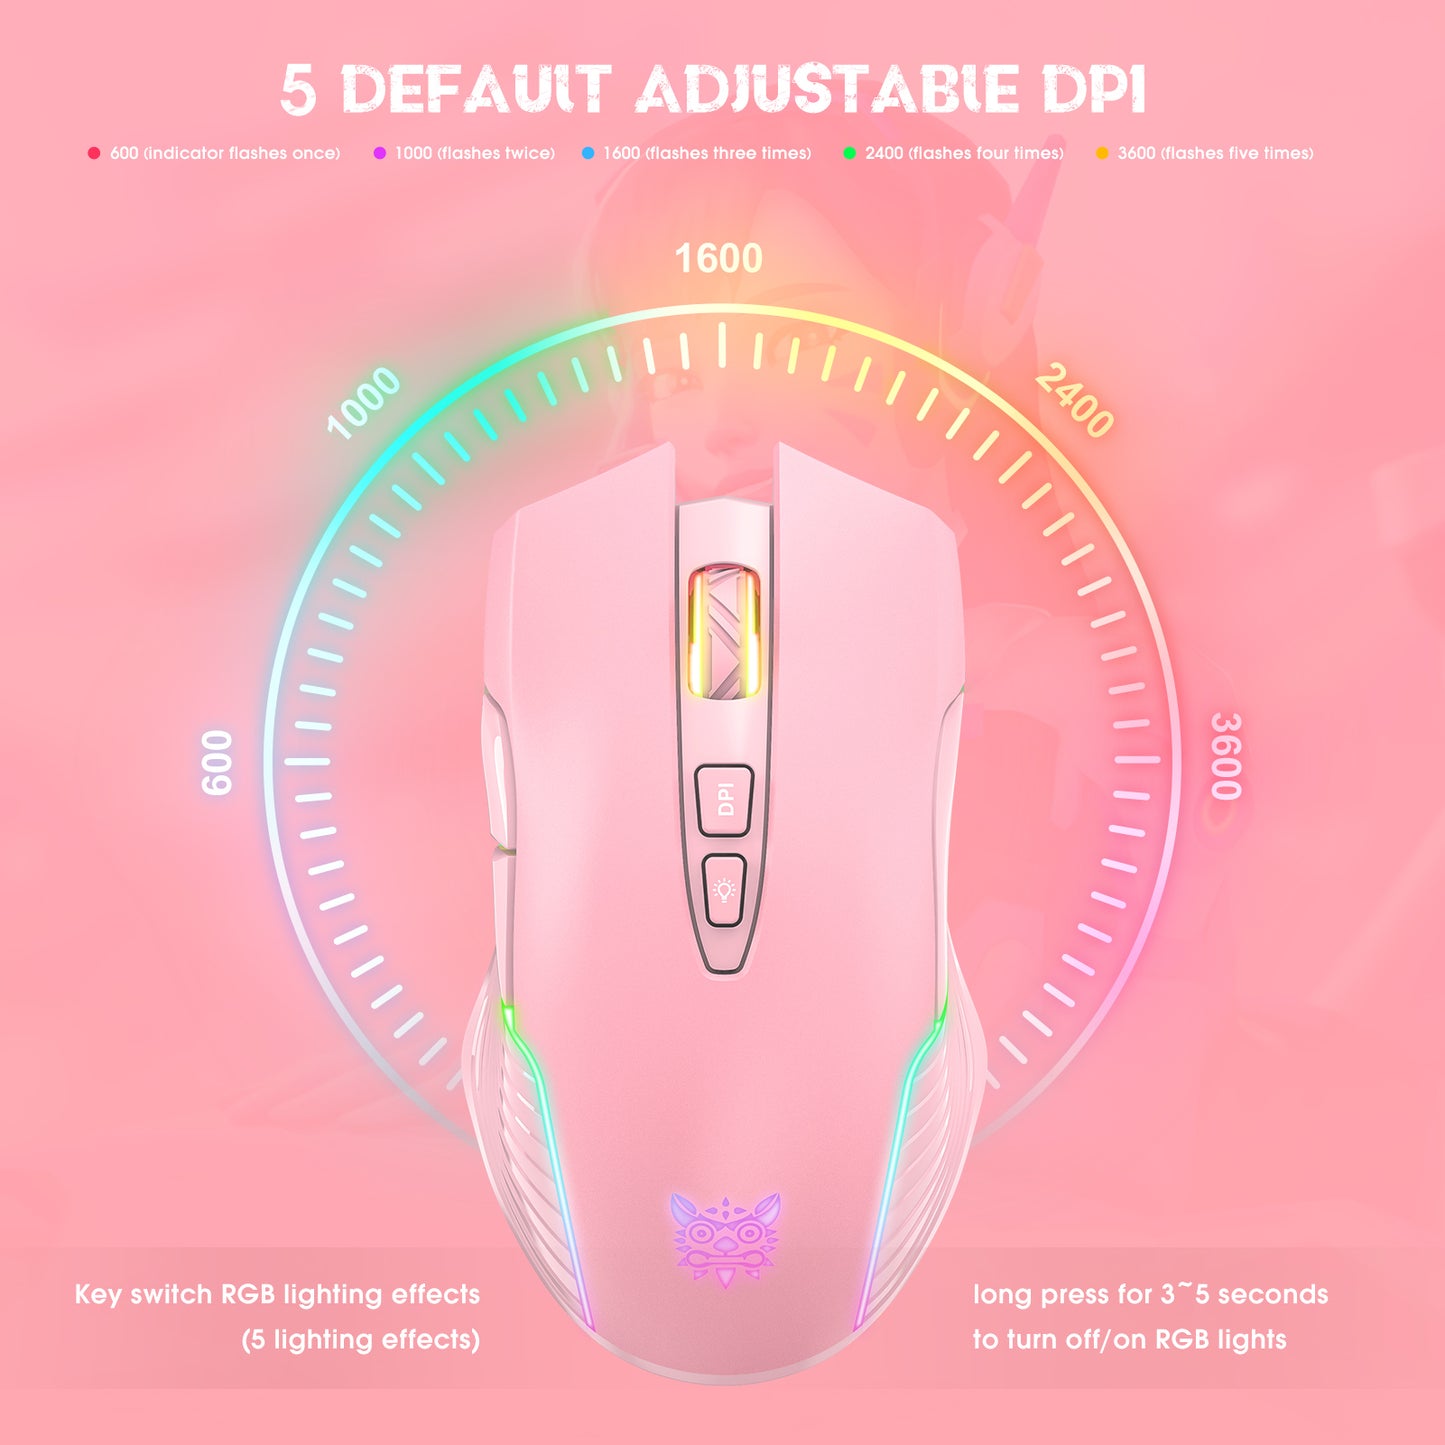 Wireless Pink Gaming Mouse Office Mouse Work Mouse 3600 adjustable DPI RGB LED Light